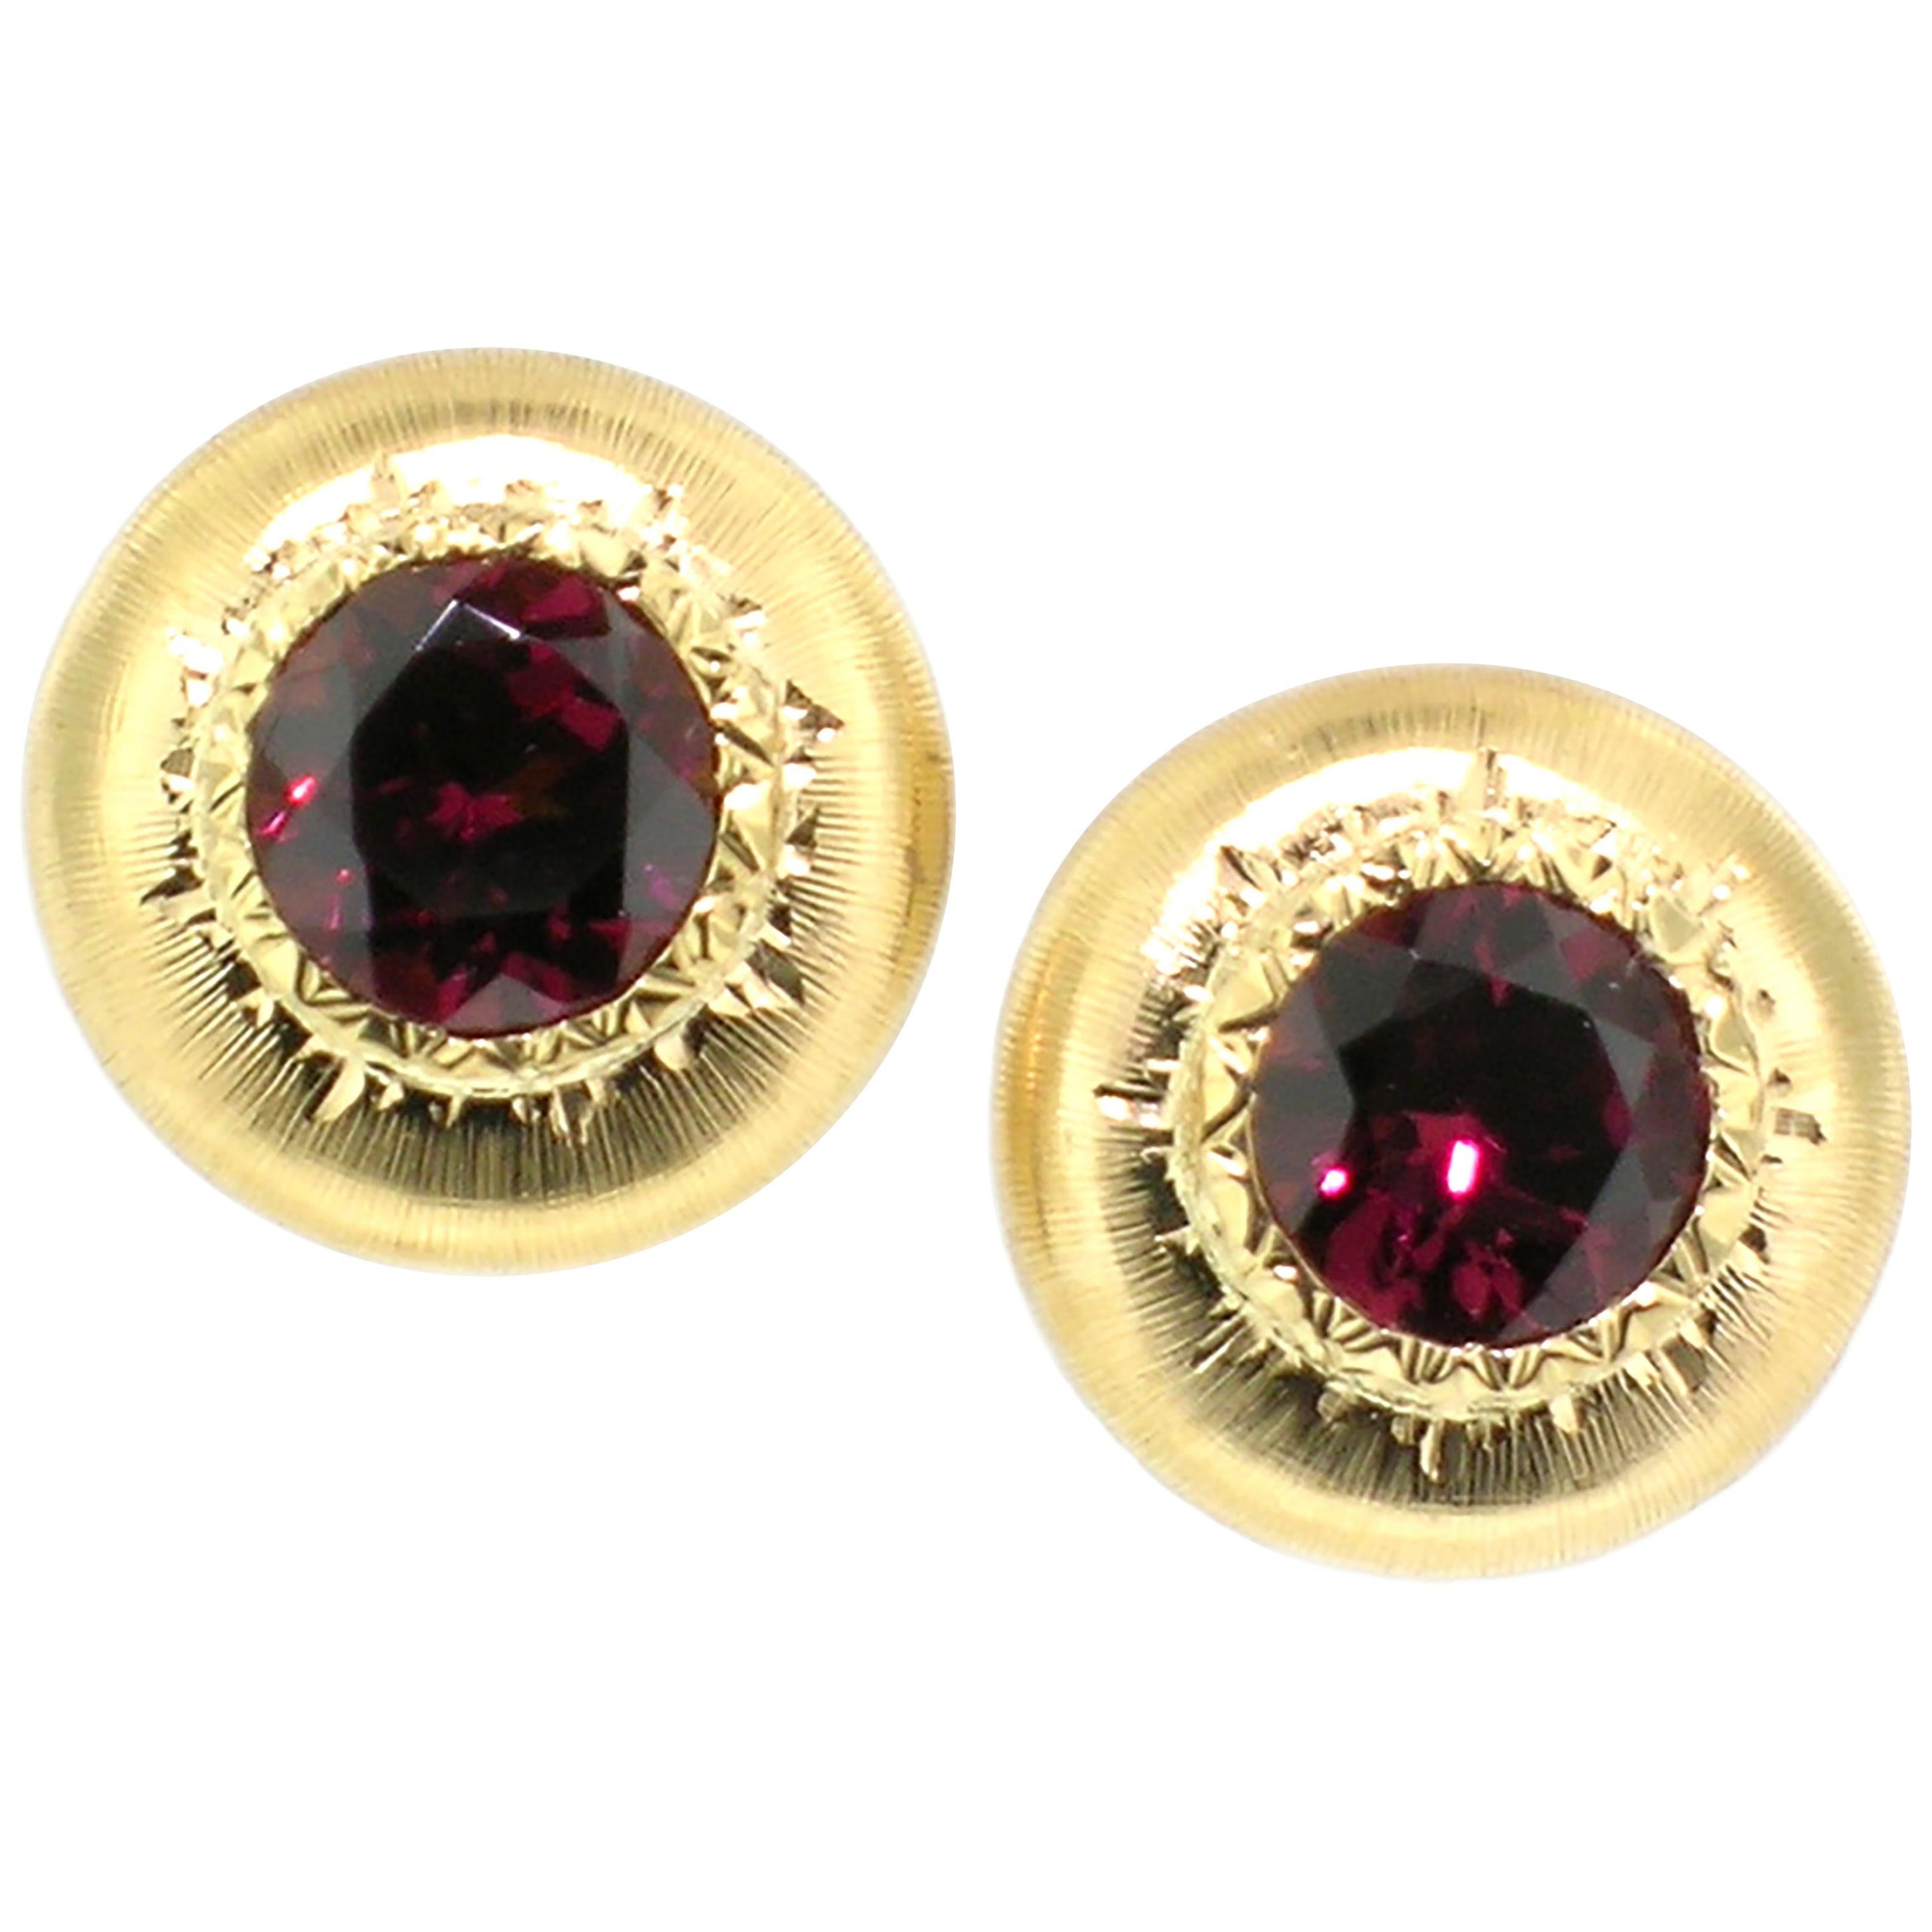 Cynthia Scott 2.02ct Rhodolite Garnet and 18kt Earrings, Made in Italy For Sale